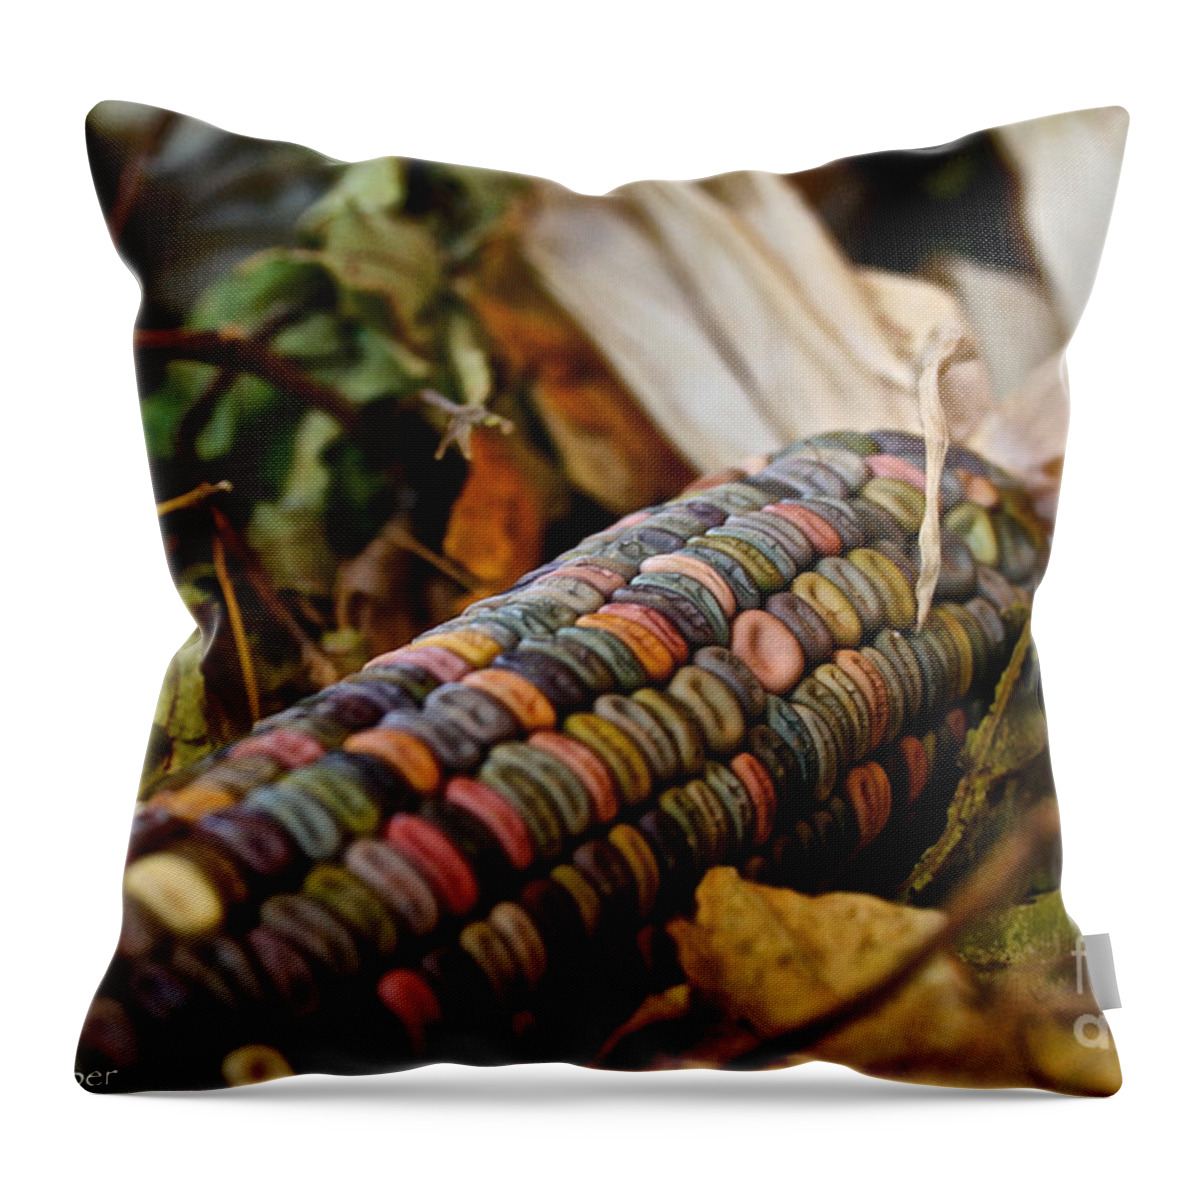 Outdoors Throw Pillow featuring the photograph Multi Colors by Susan Herber